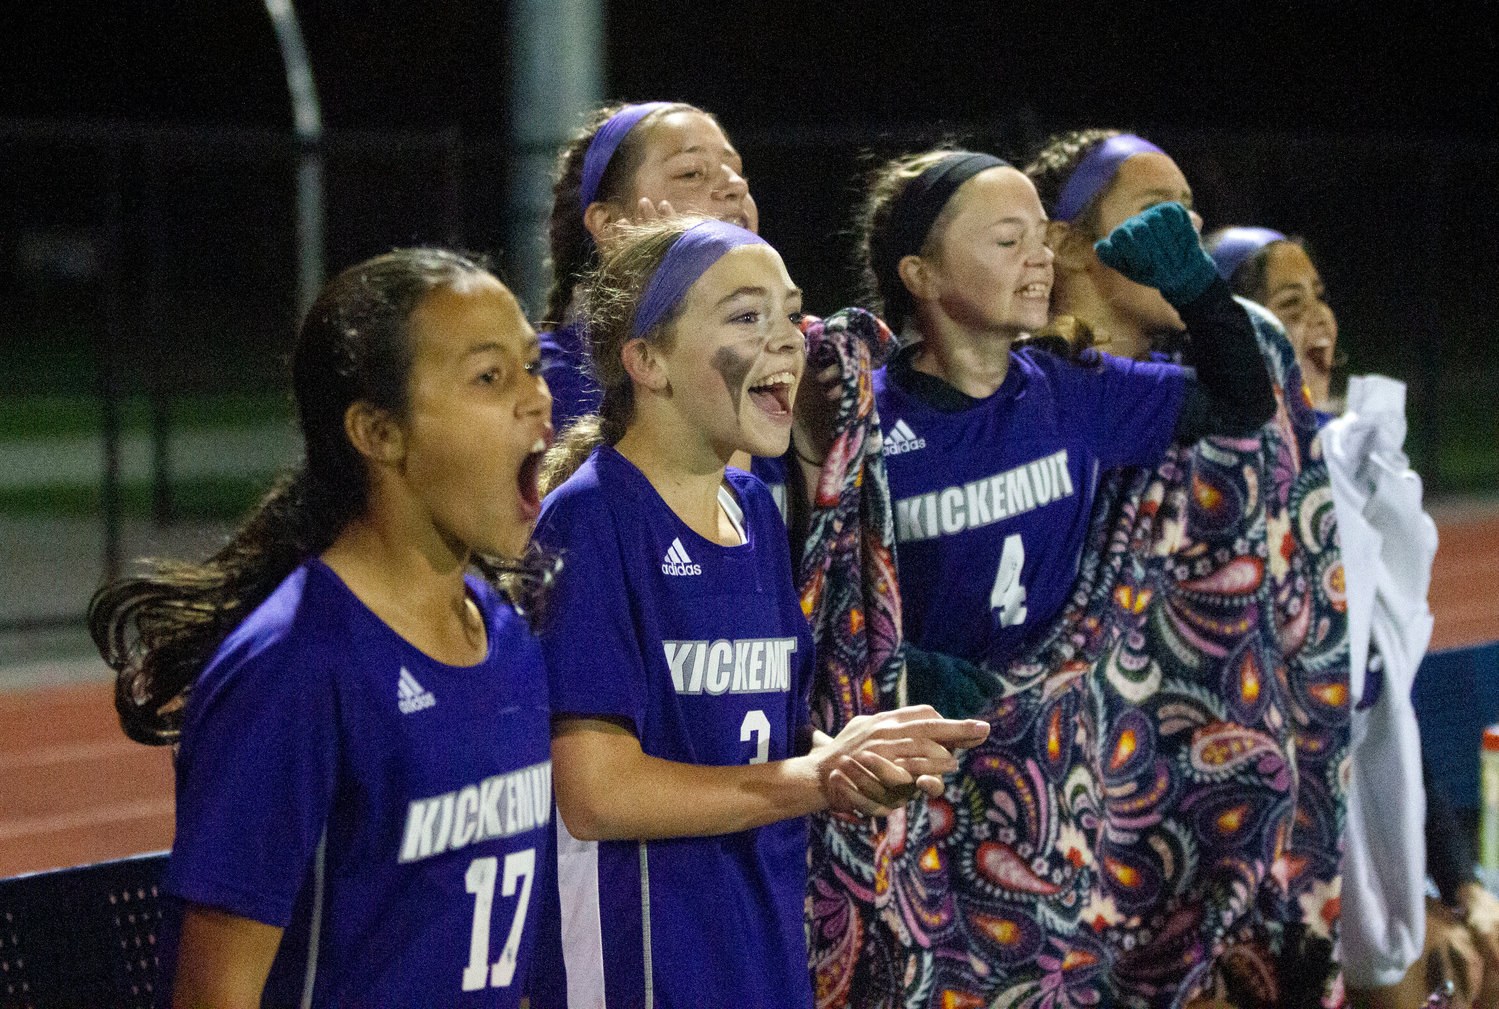 Maya Goglia (left), Ava Morissette, Norah Francis, Catherine Frawley and others cheer on their teammates from the bench.